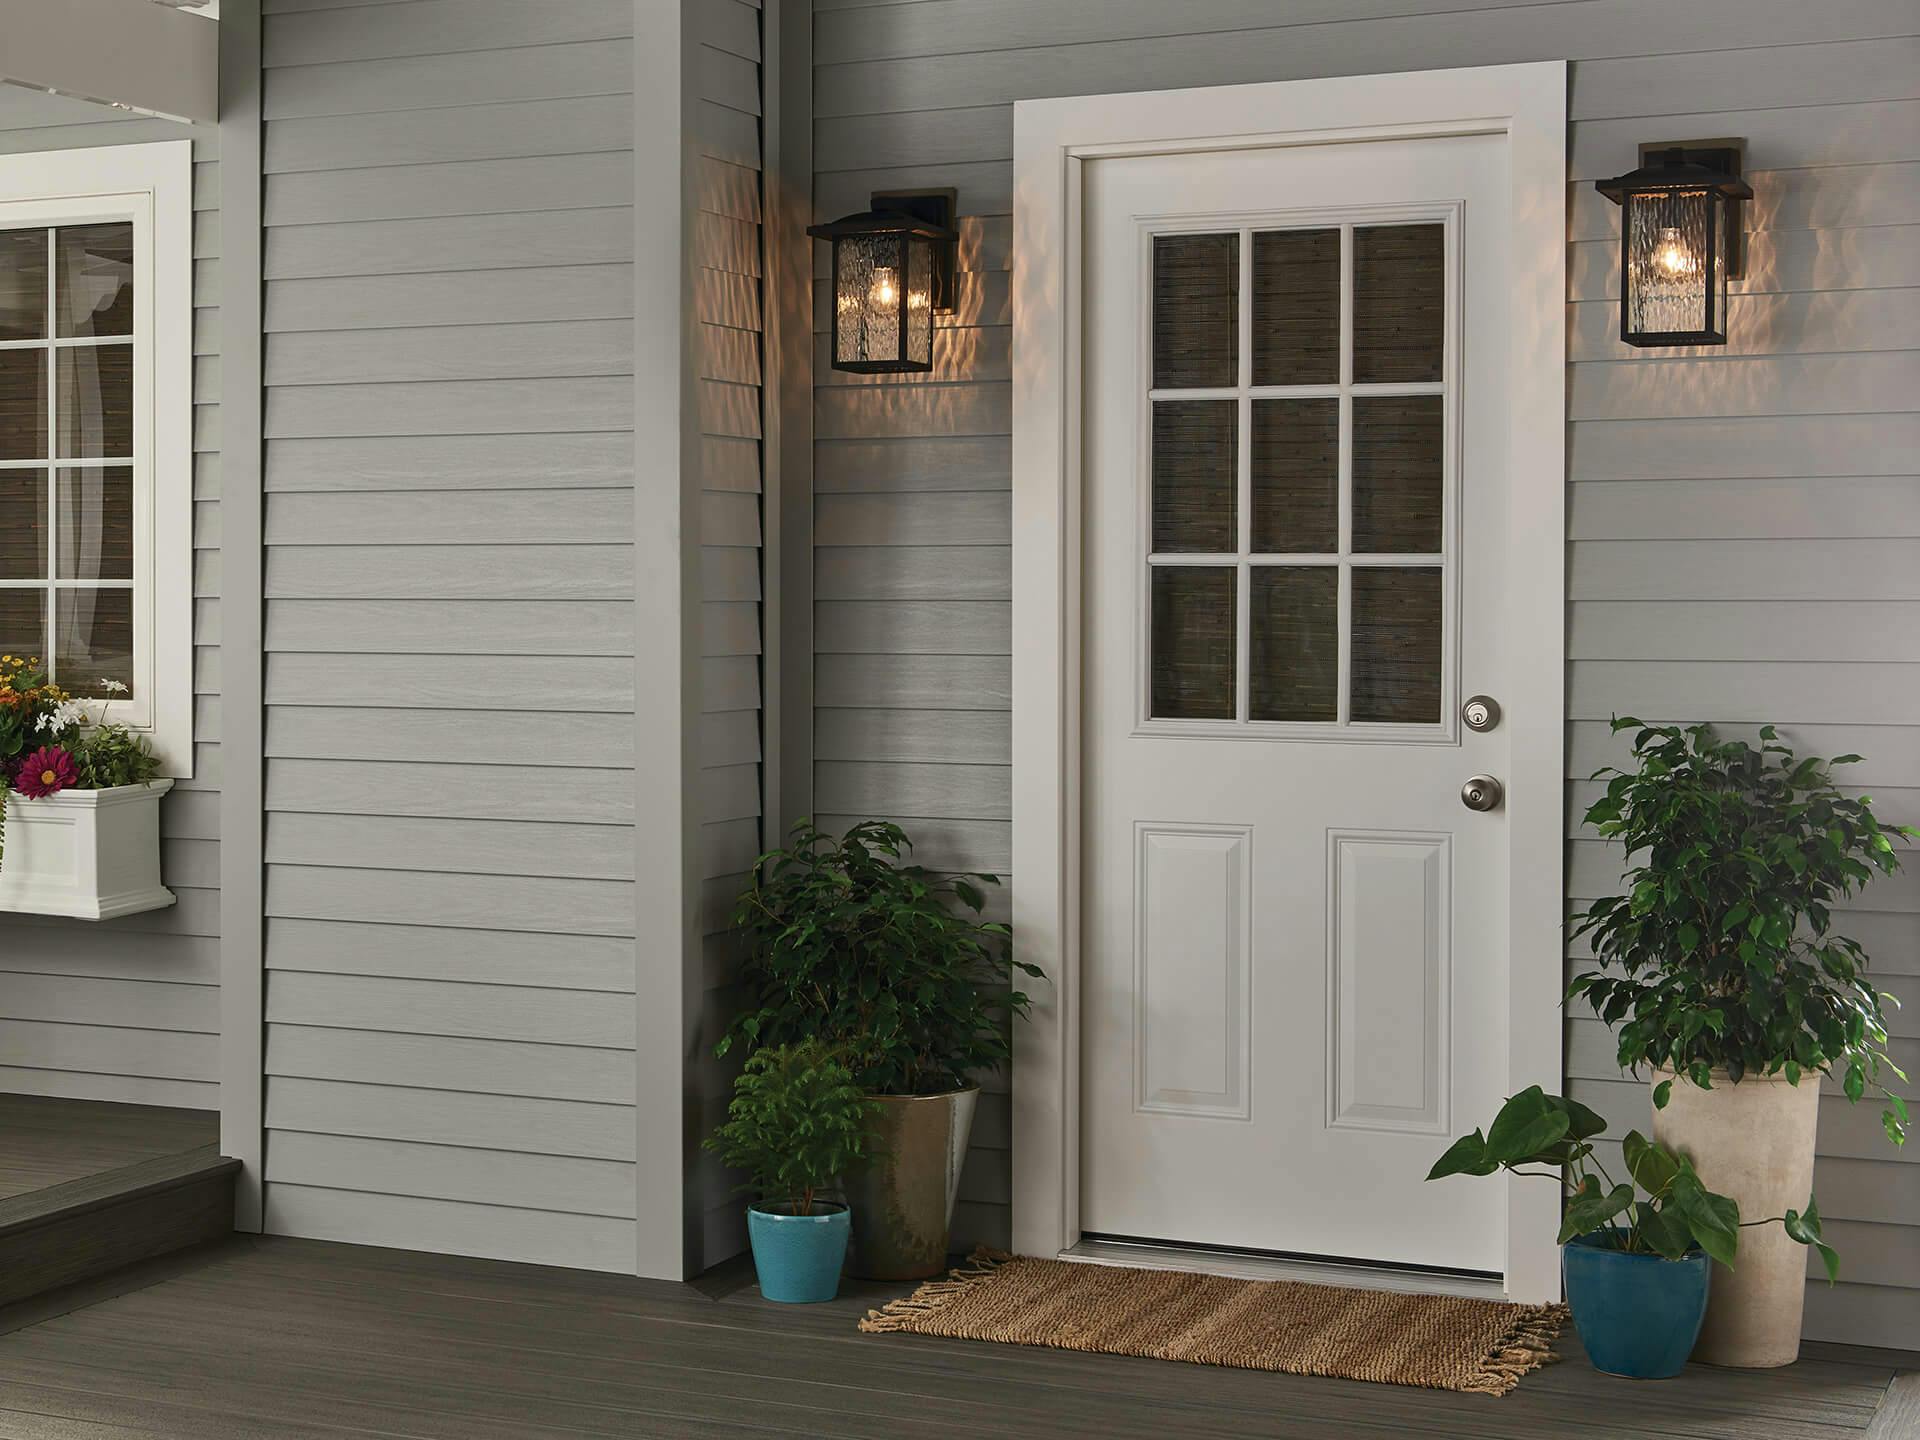 Front porch with two black capanna sconces on either side of a white front door.